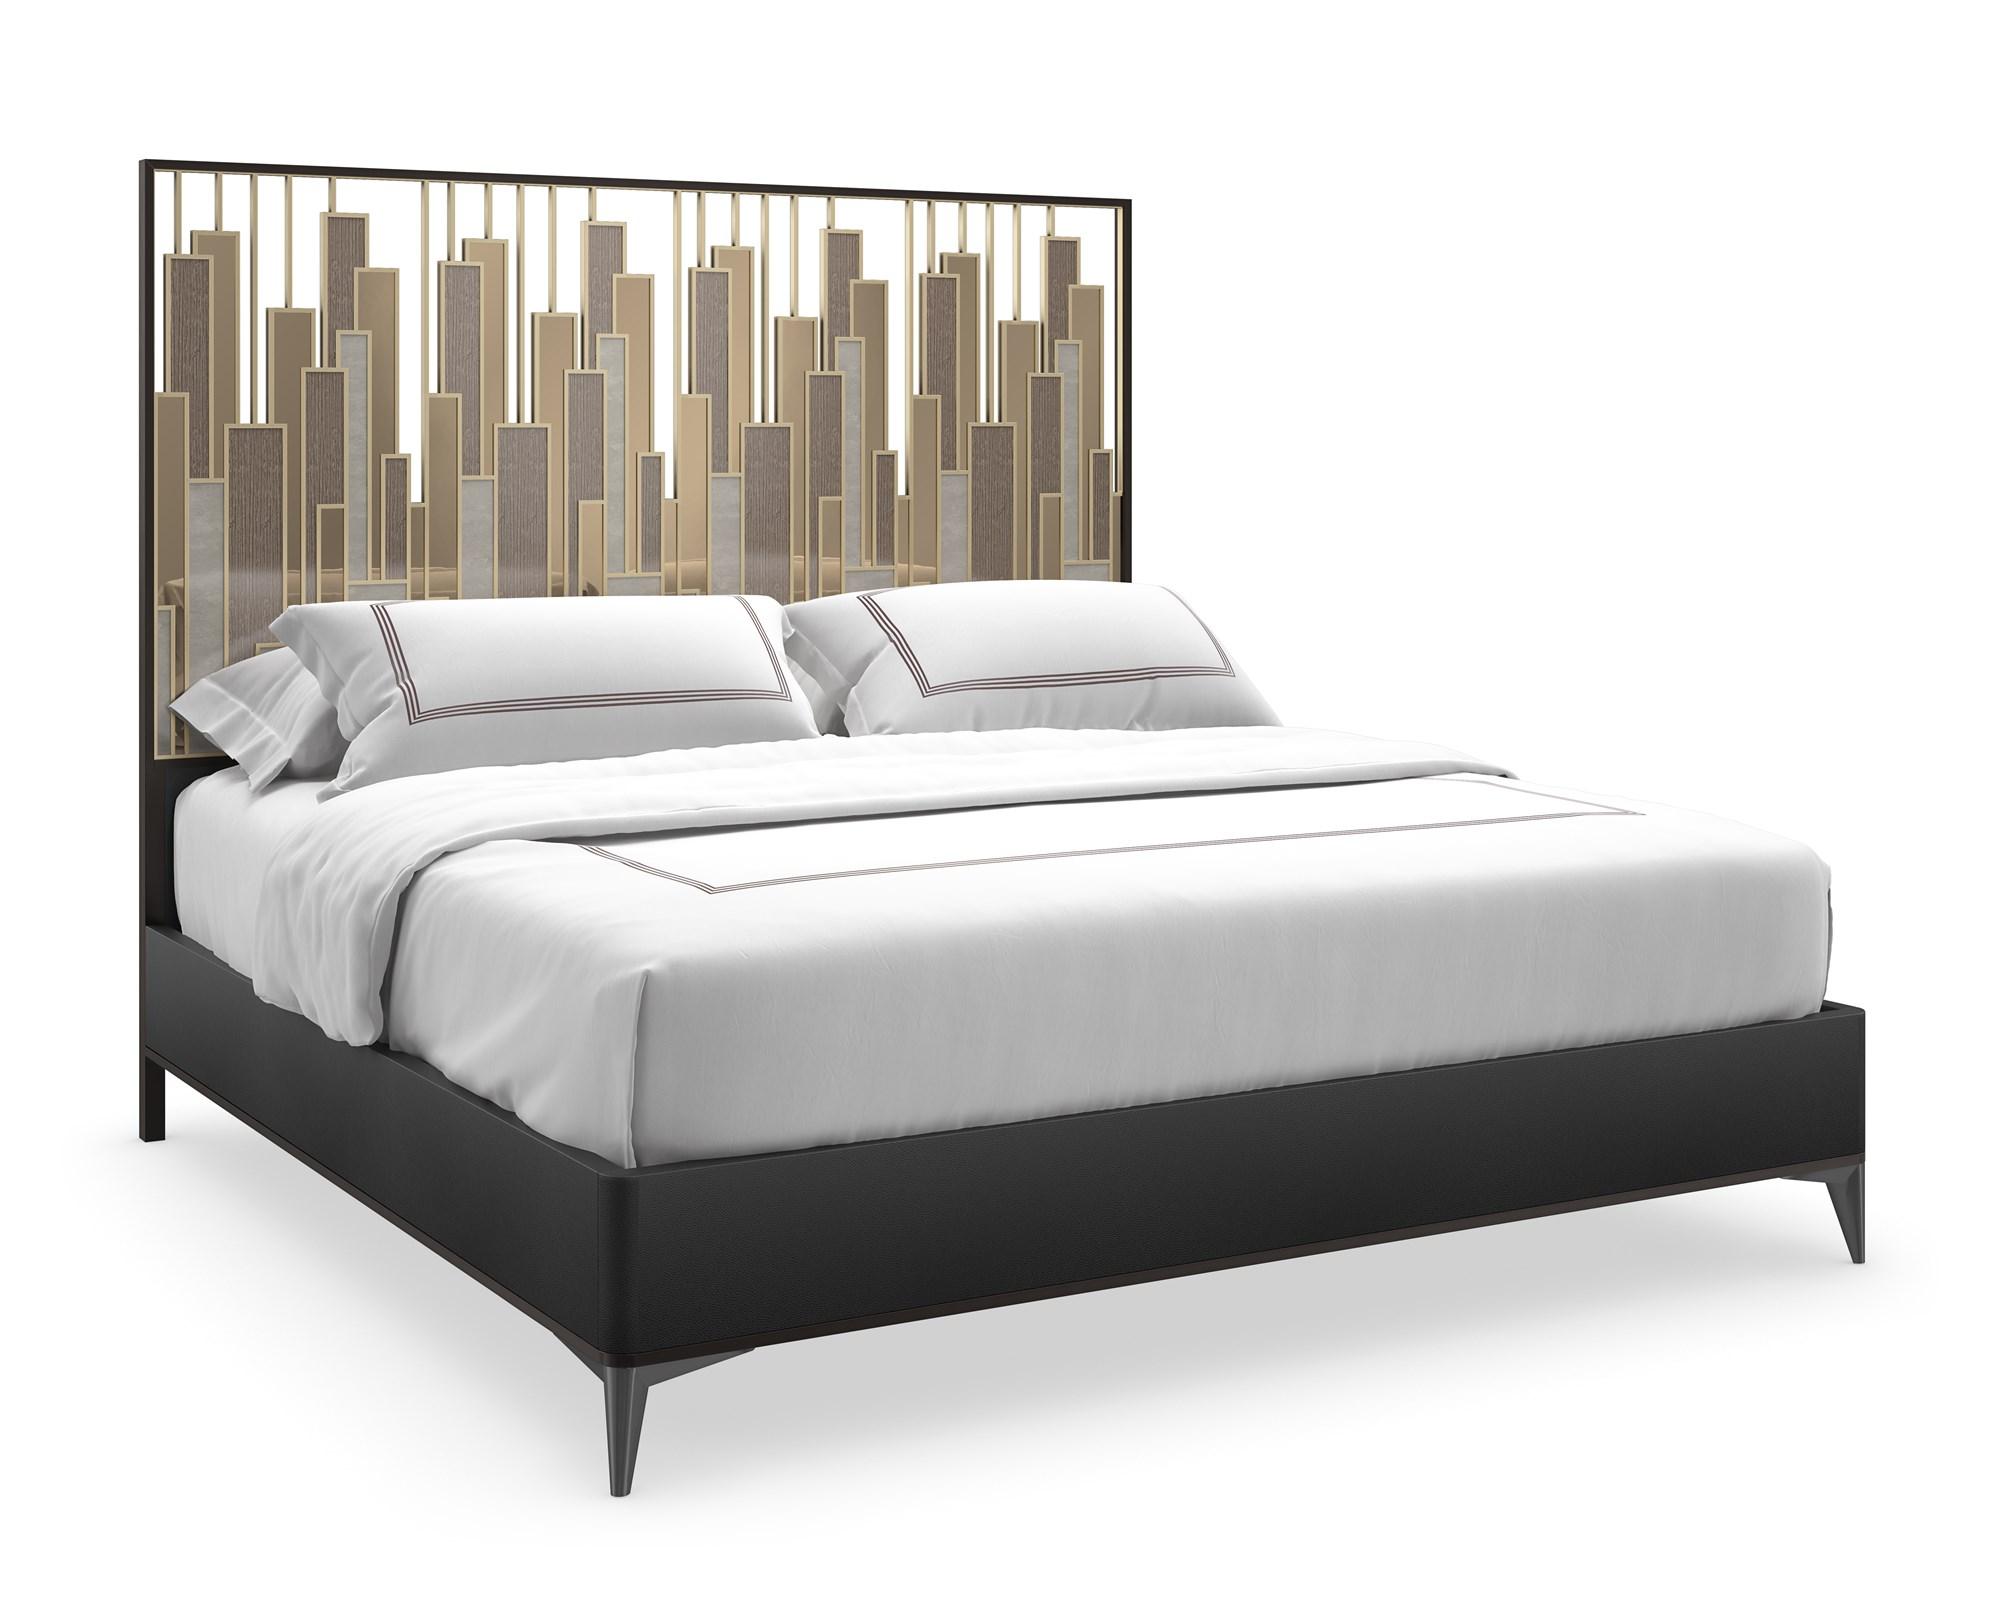 Contemporary Platform Bed CITYSCAPE KING BED SIG-021-121 in Metallic, Chocolate 